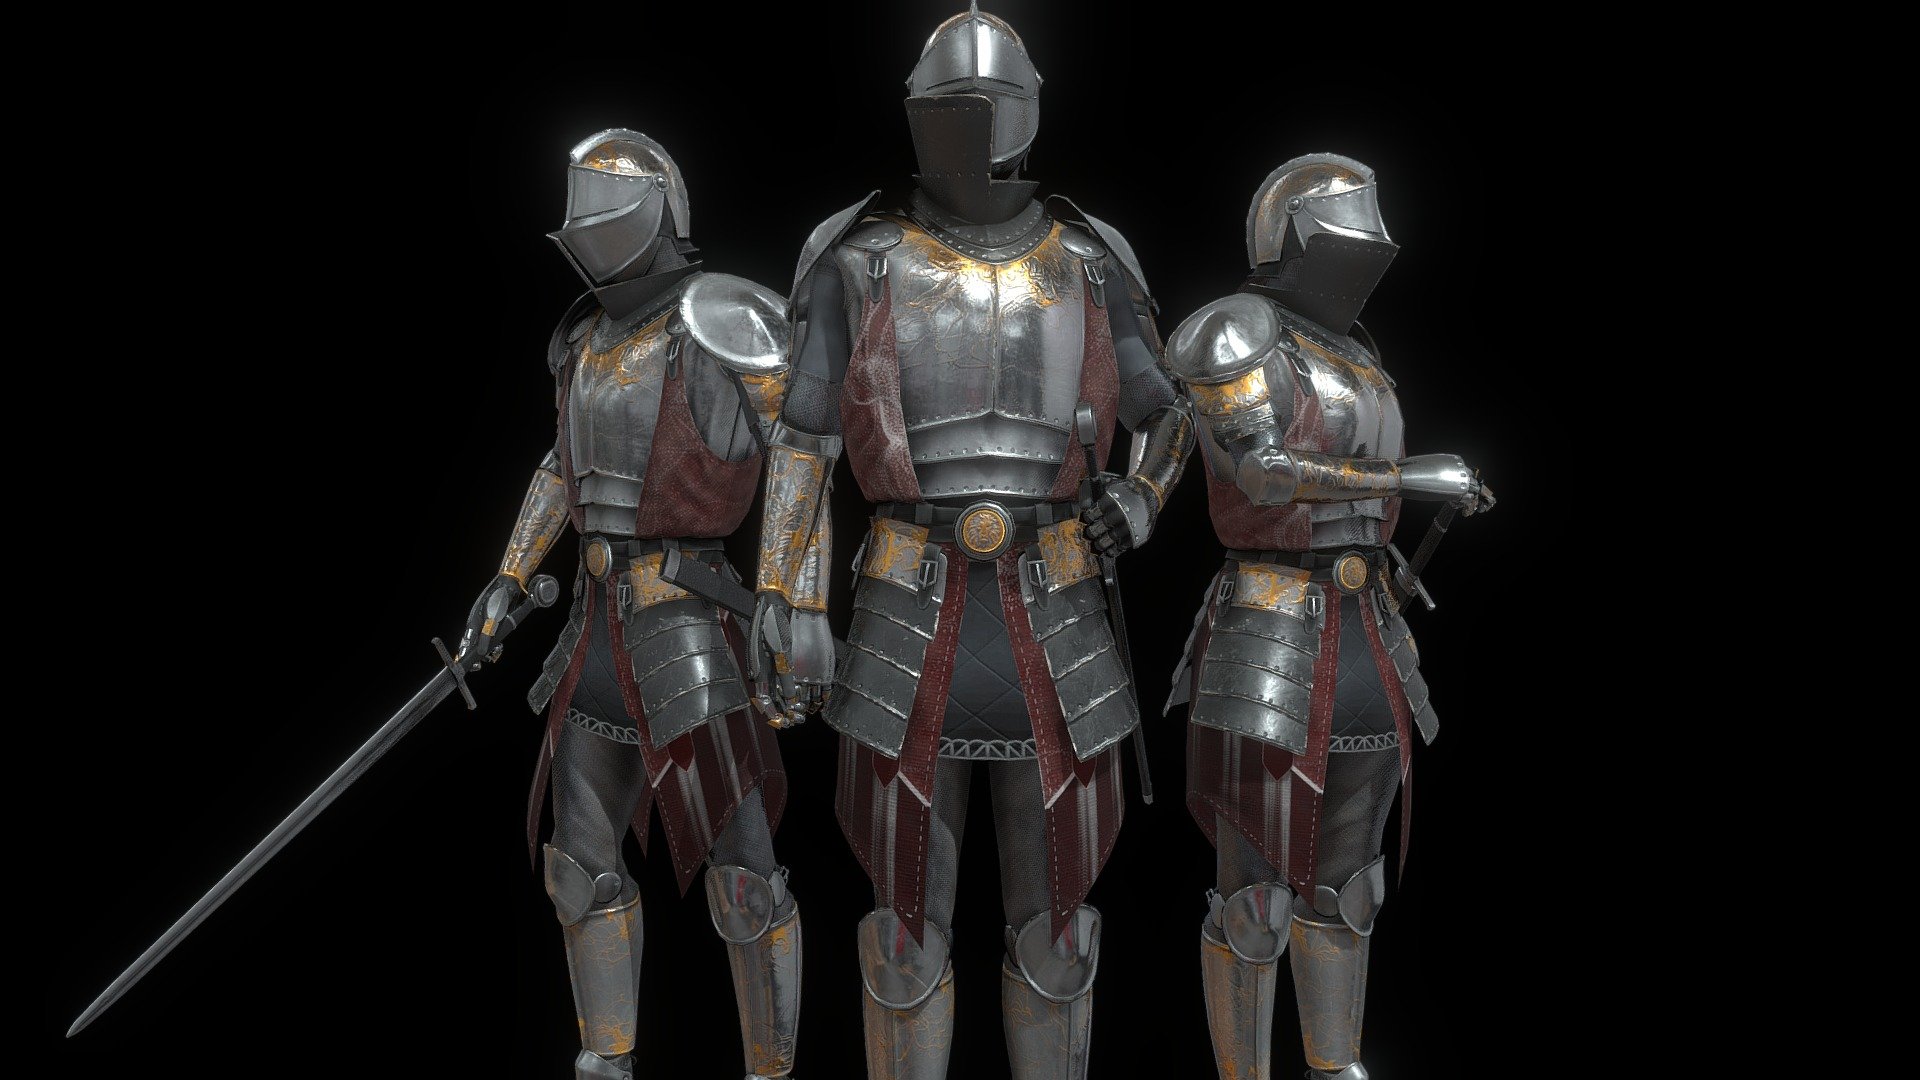 A clothing and armor set designed for my fantasy RPG, Riptide.

Took some of the old design and renewed it with Riptide's official concepts and style.

At 35k per set and 38k armed with a sword and sheathe, this model is a near-final draft of the Ydanian Royal Soldier.

Please visit and support my life-long creation, Riptide 3d model